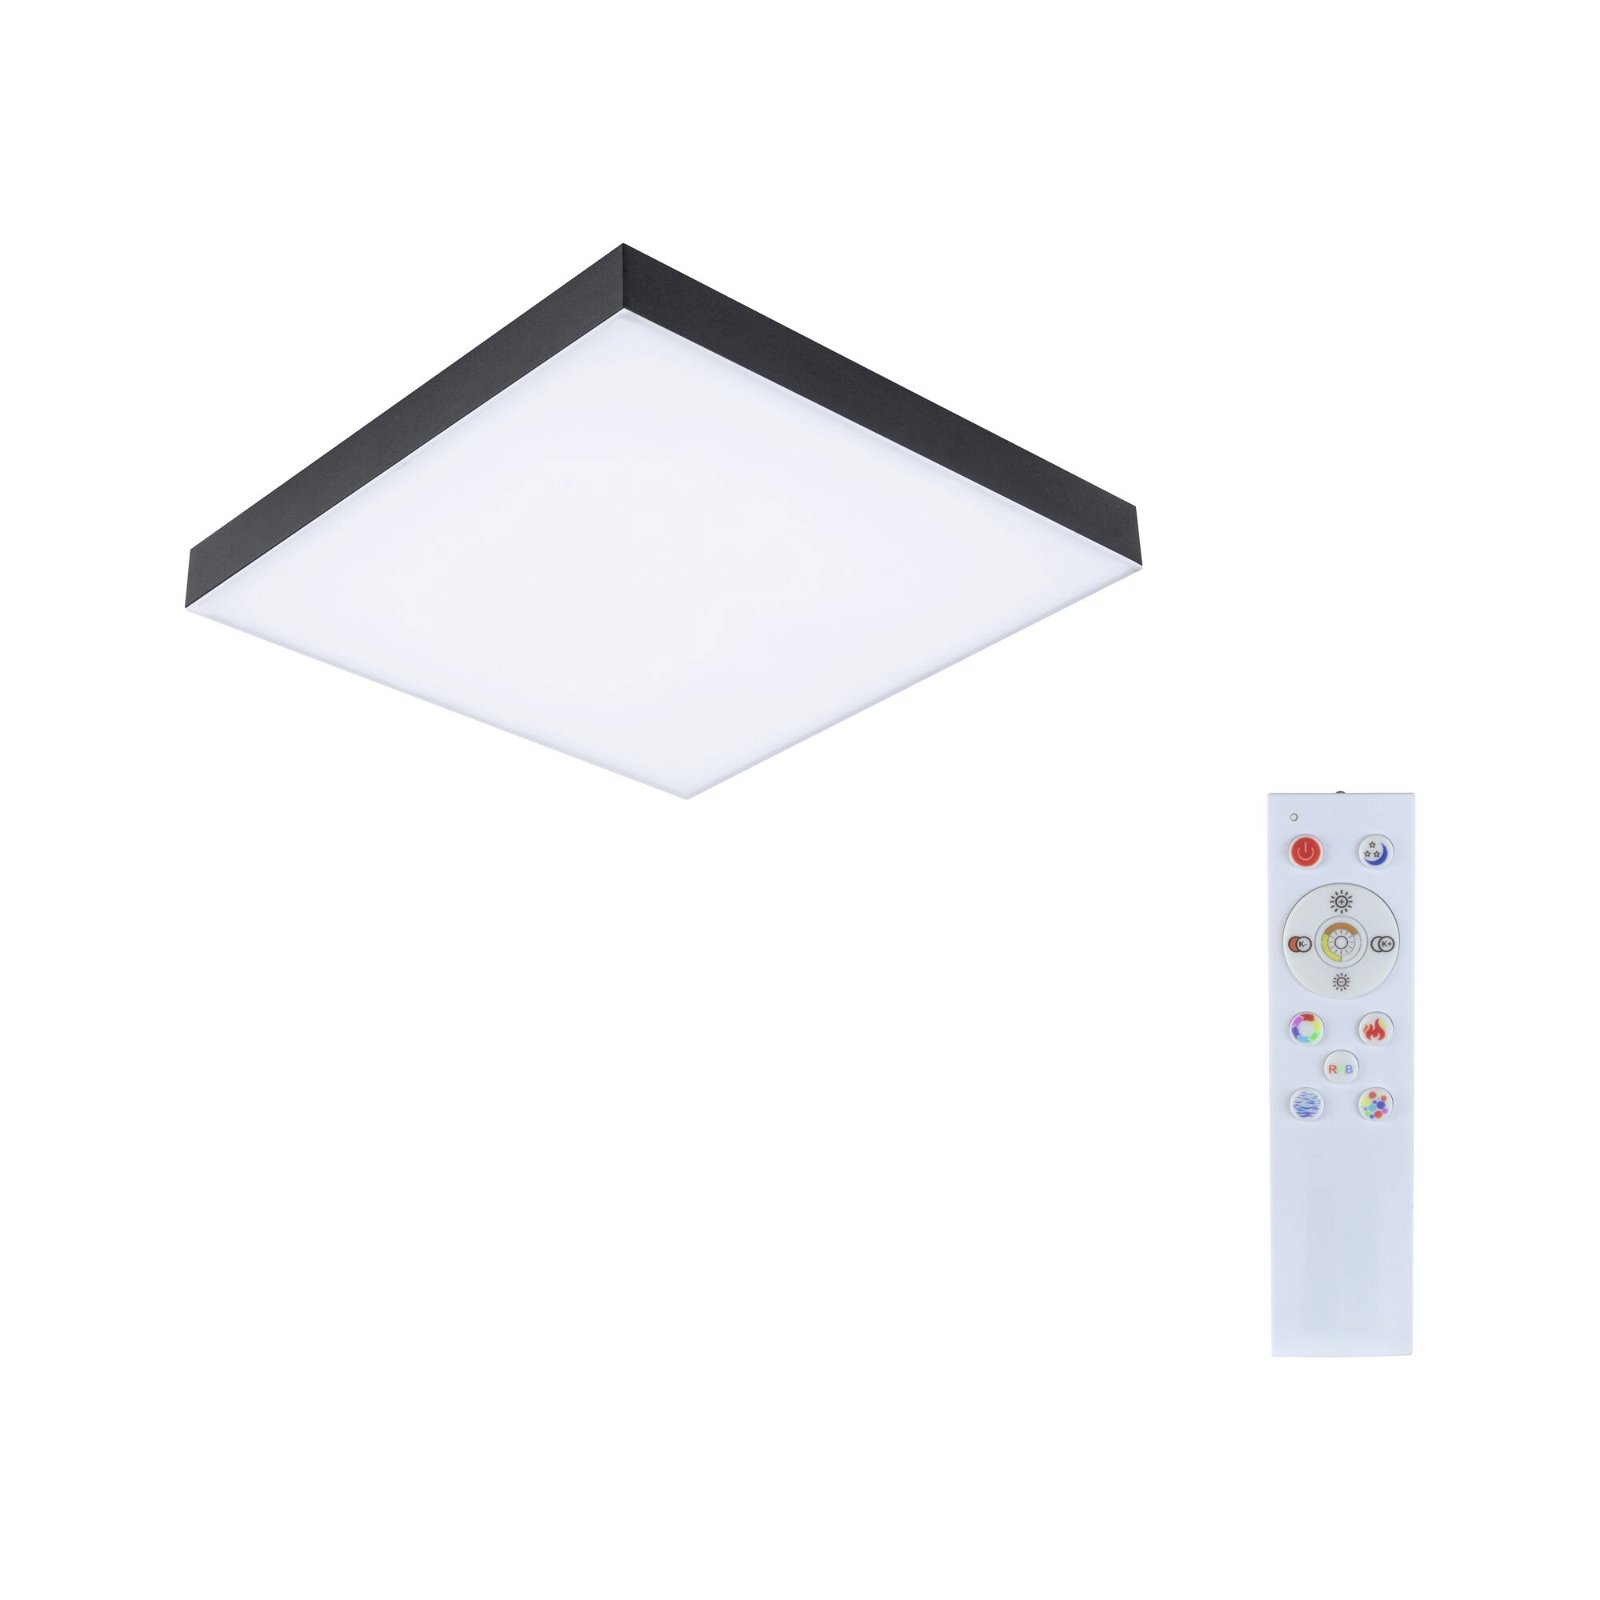 LED Panel Velora Rainbow dynamicRGBW square 295x295mm 13,2W 1140lm 3000 - 6500K Black dimmable